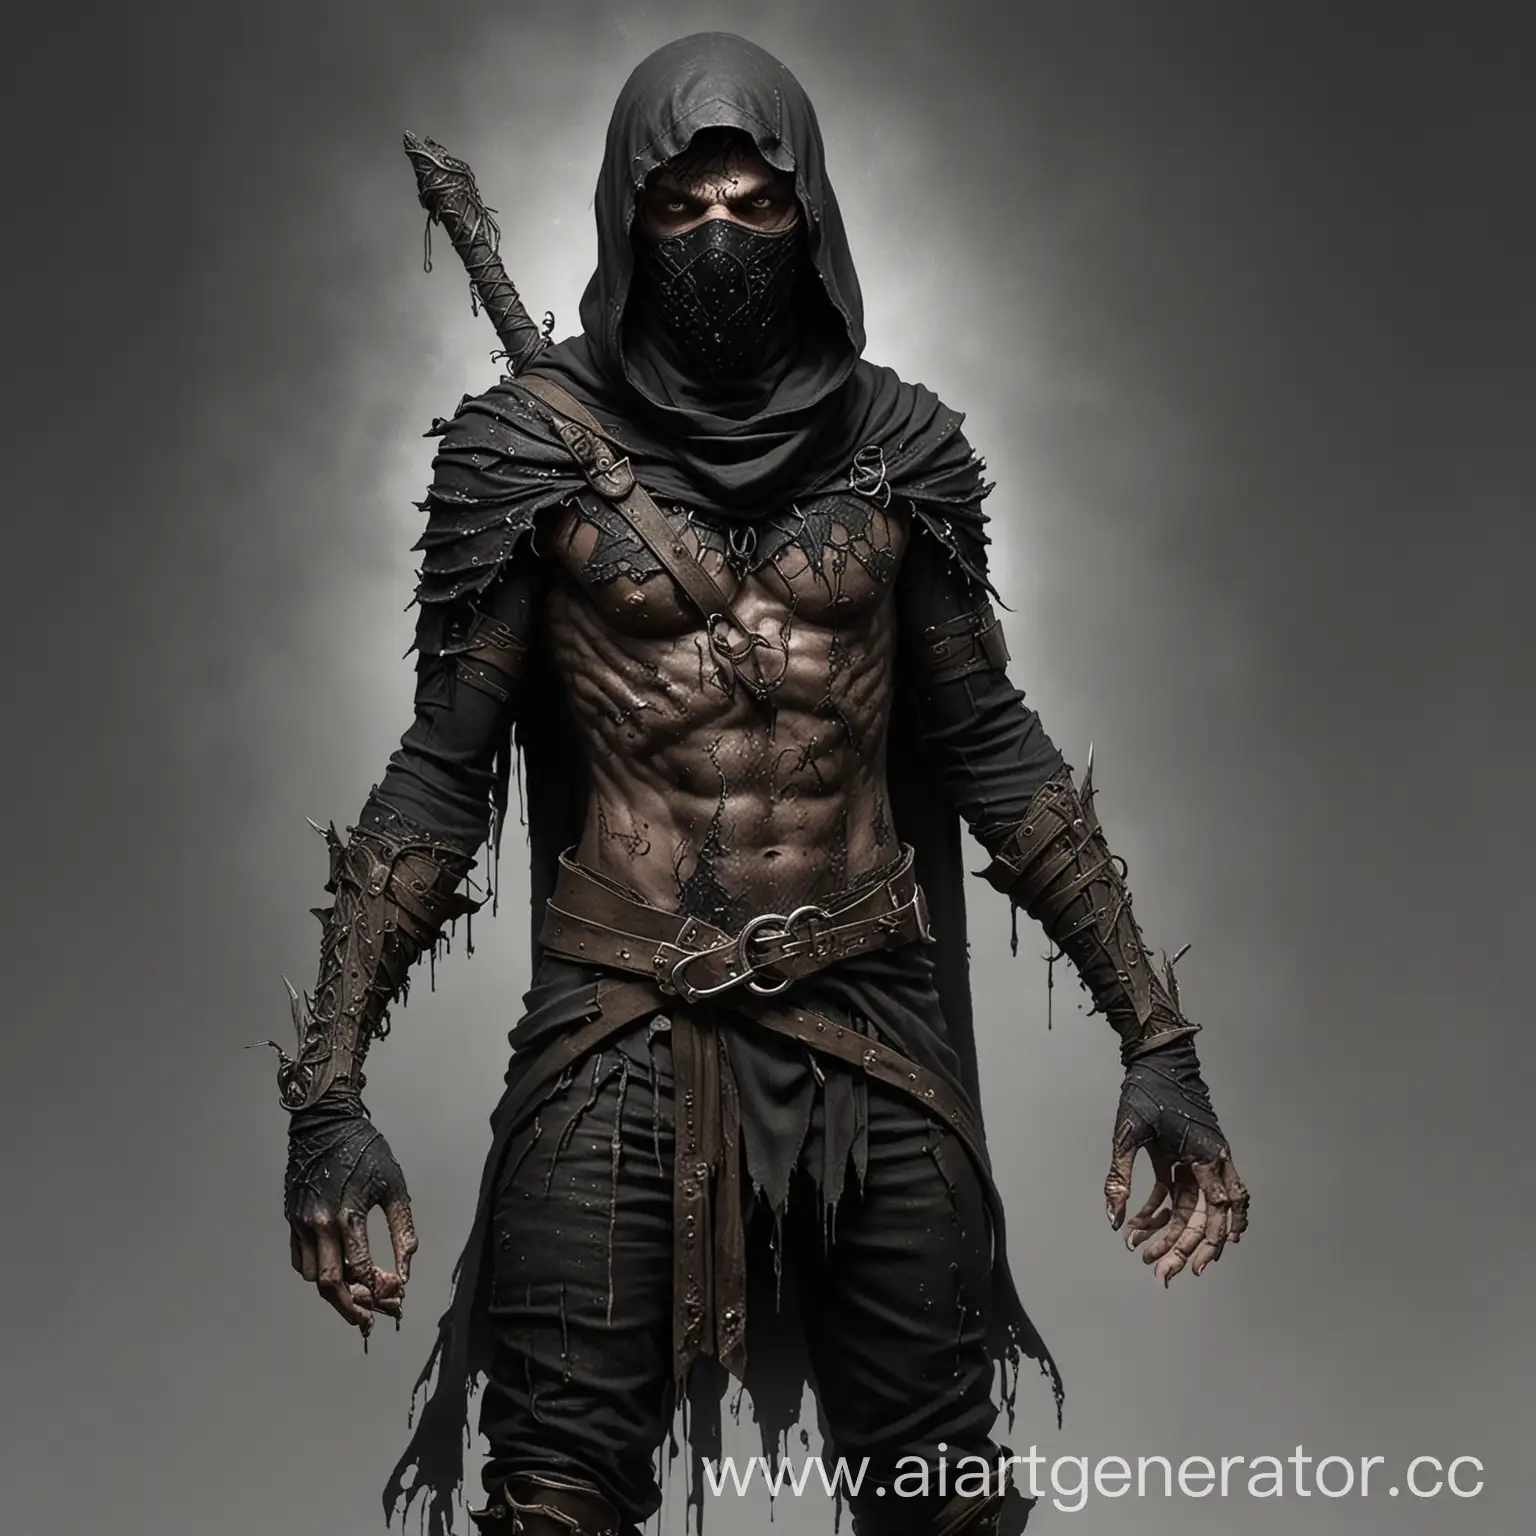 Ethereal-HalfElf-Warrior-with-Staff-Prosthetic-in-Tattered-Balaclava